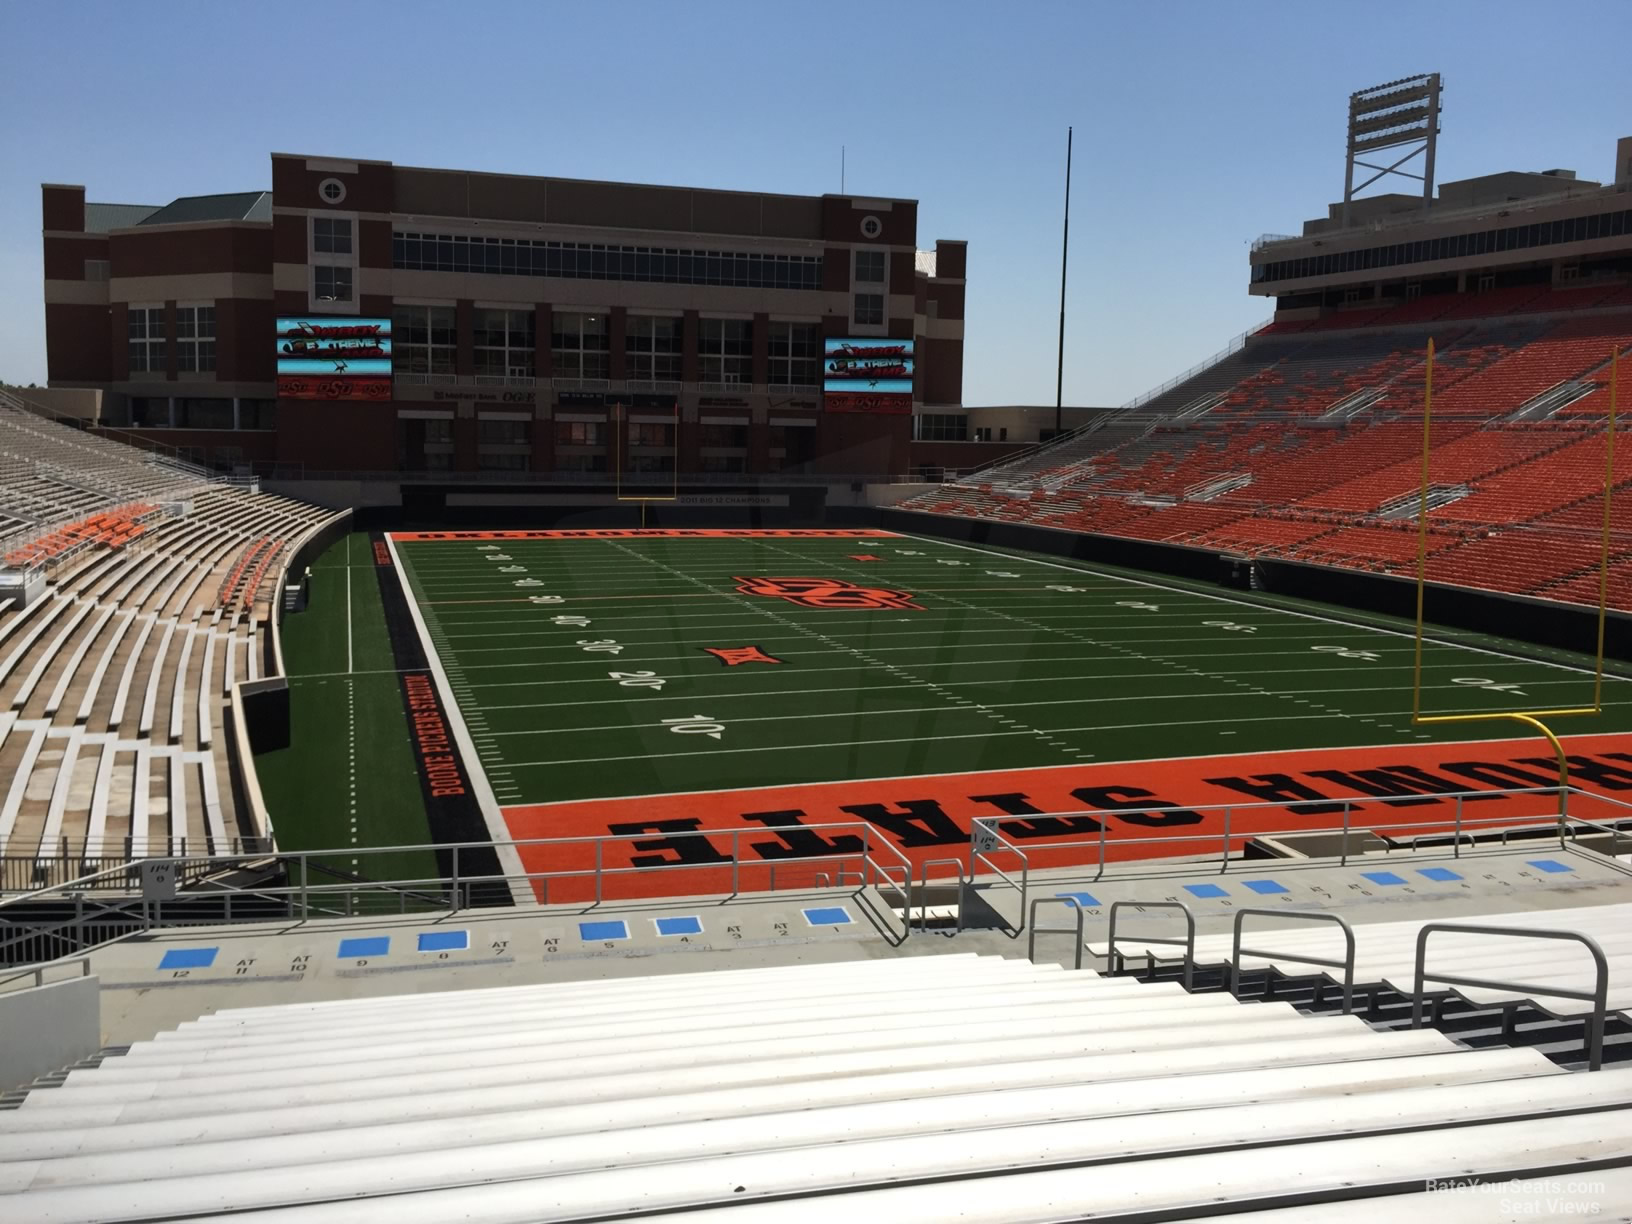 section 219, row 20 seat view  - boone pickens stadium